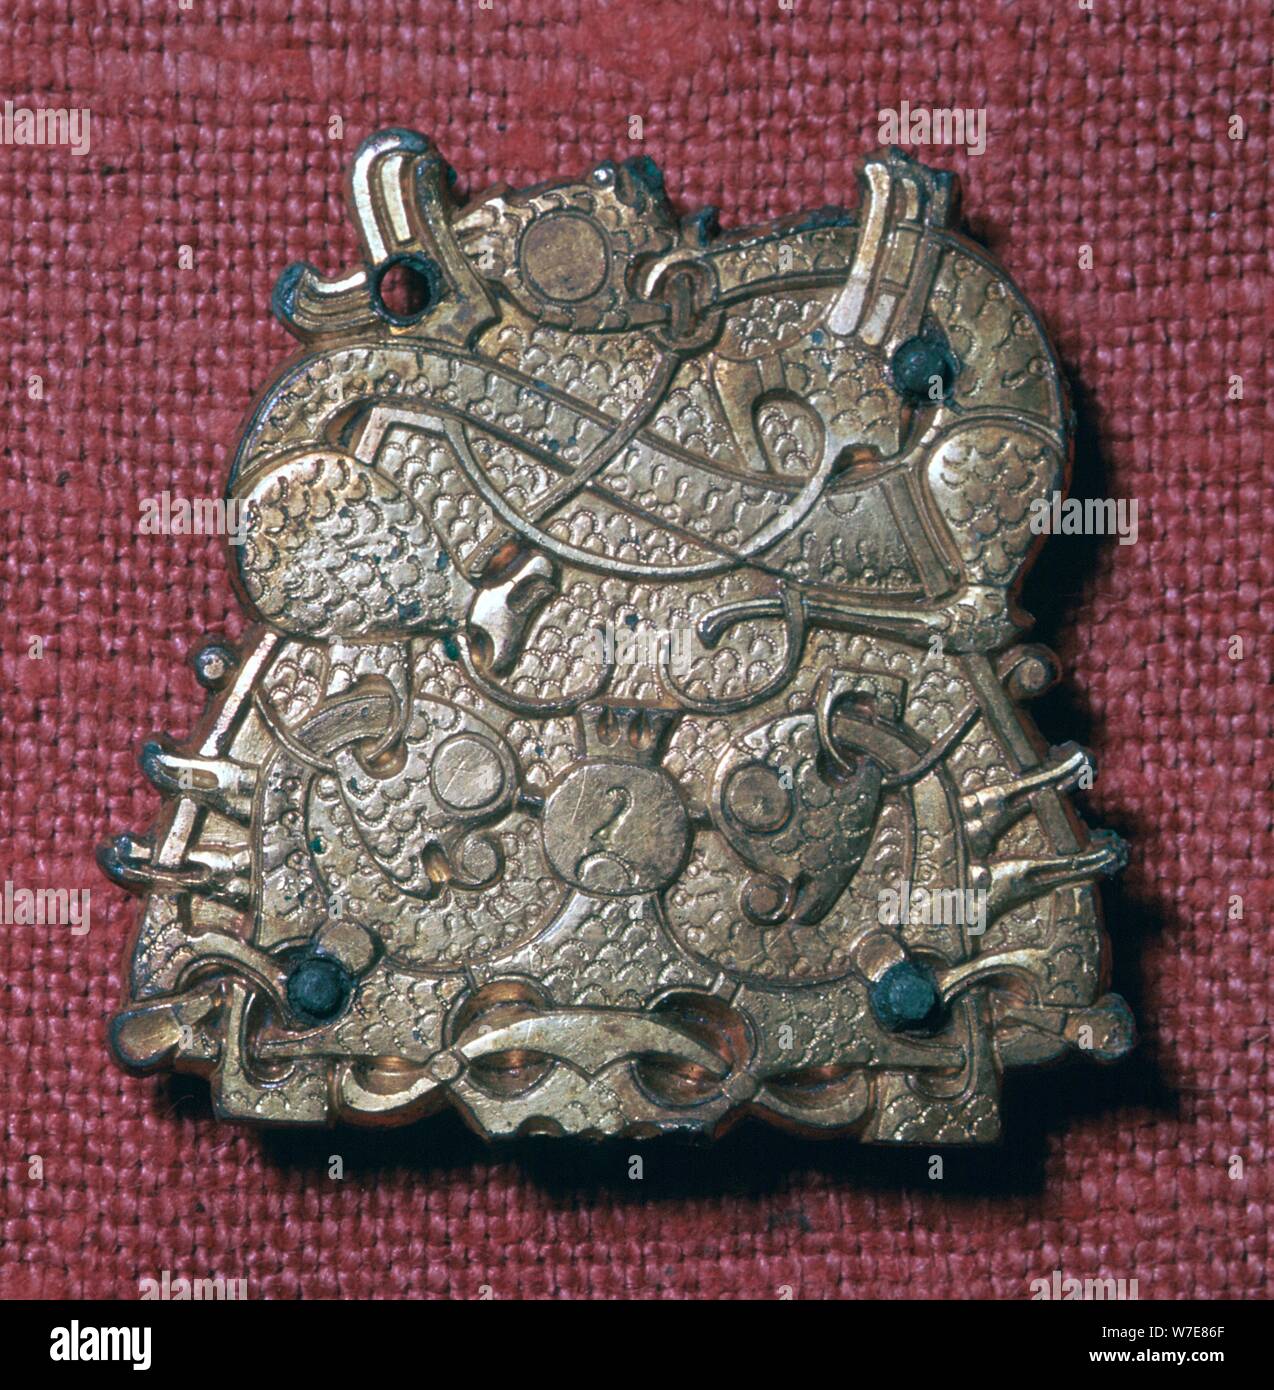 Broche d'une tombe Viking. Artiste : Inconnu Banque D'Images